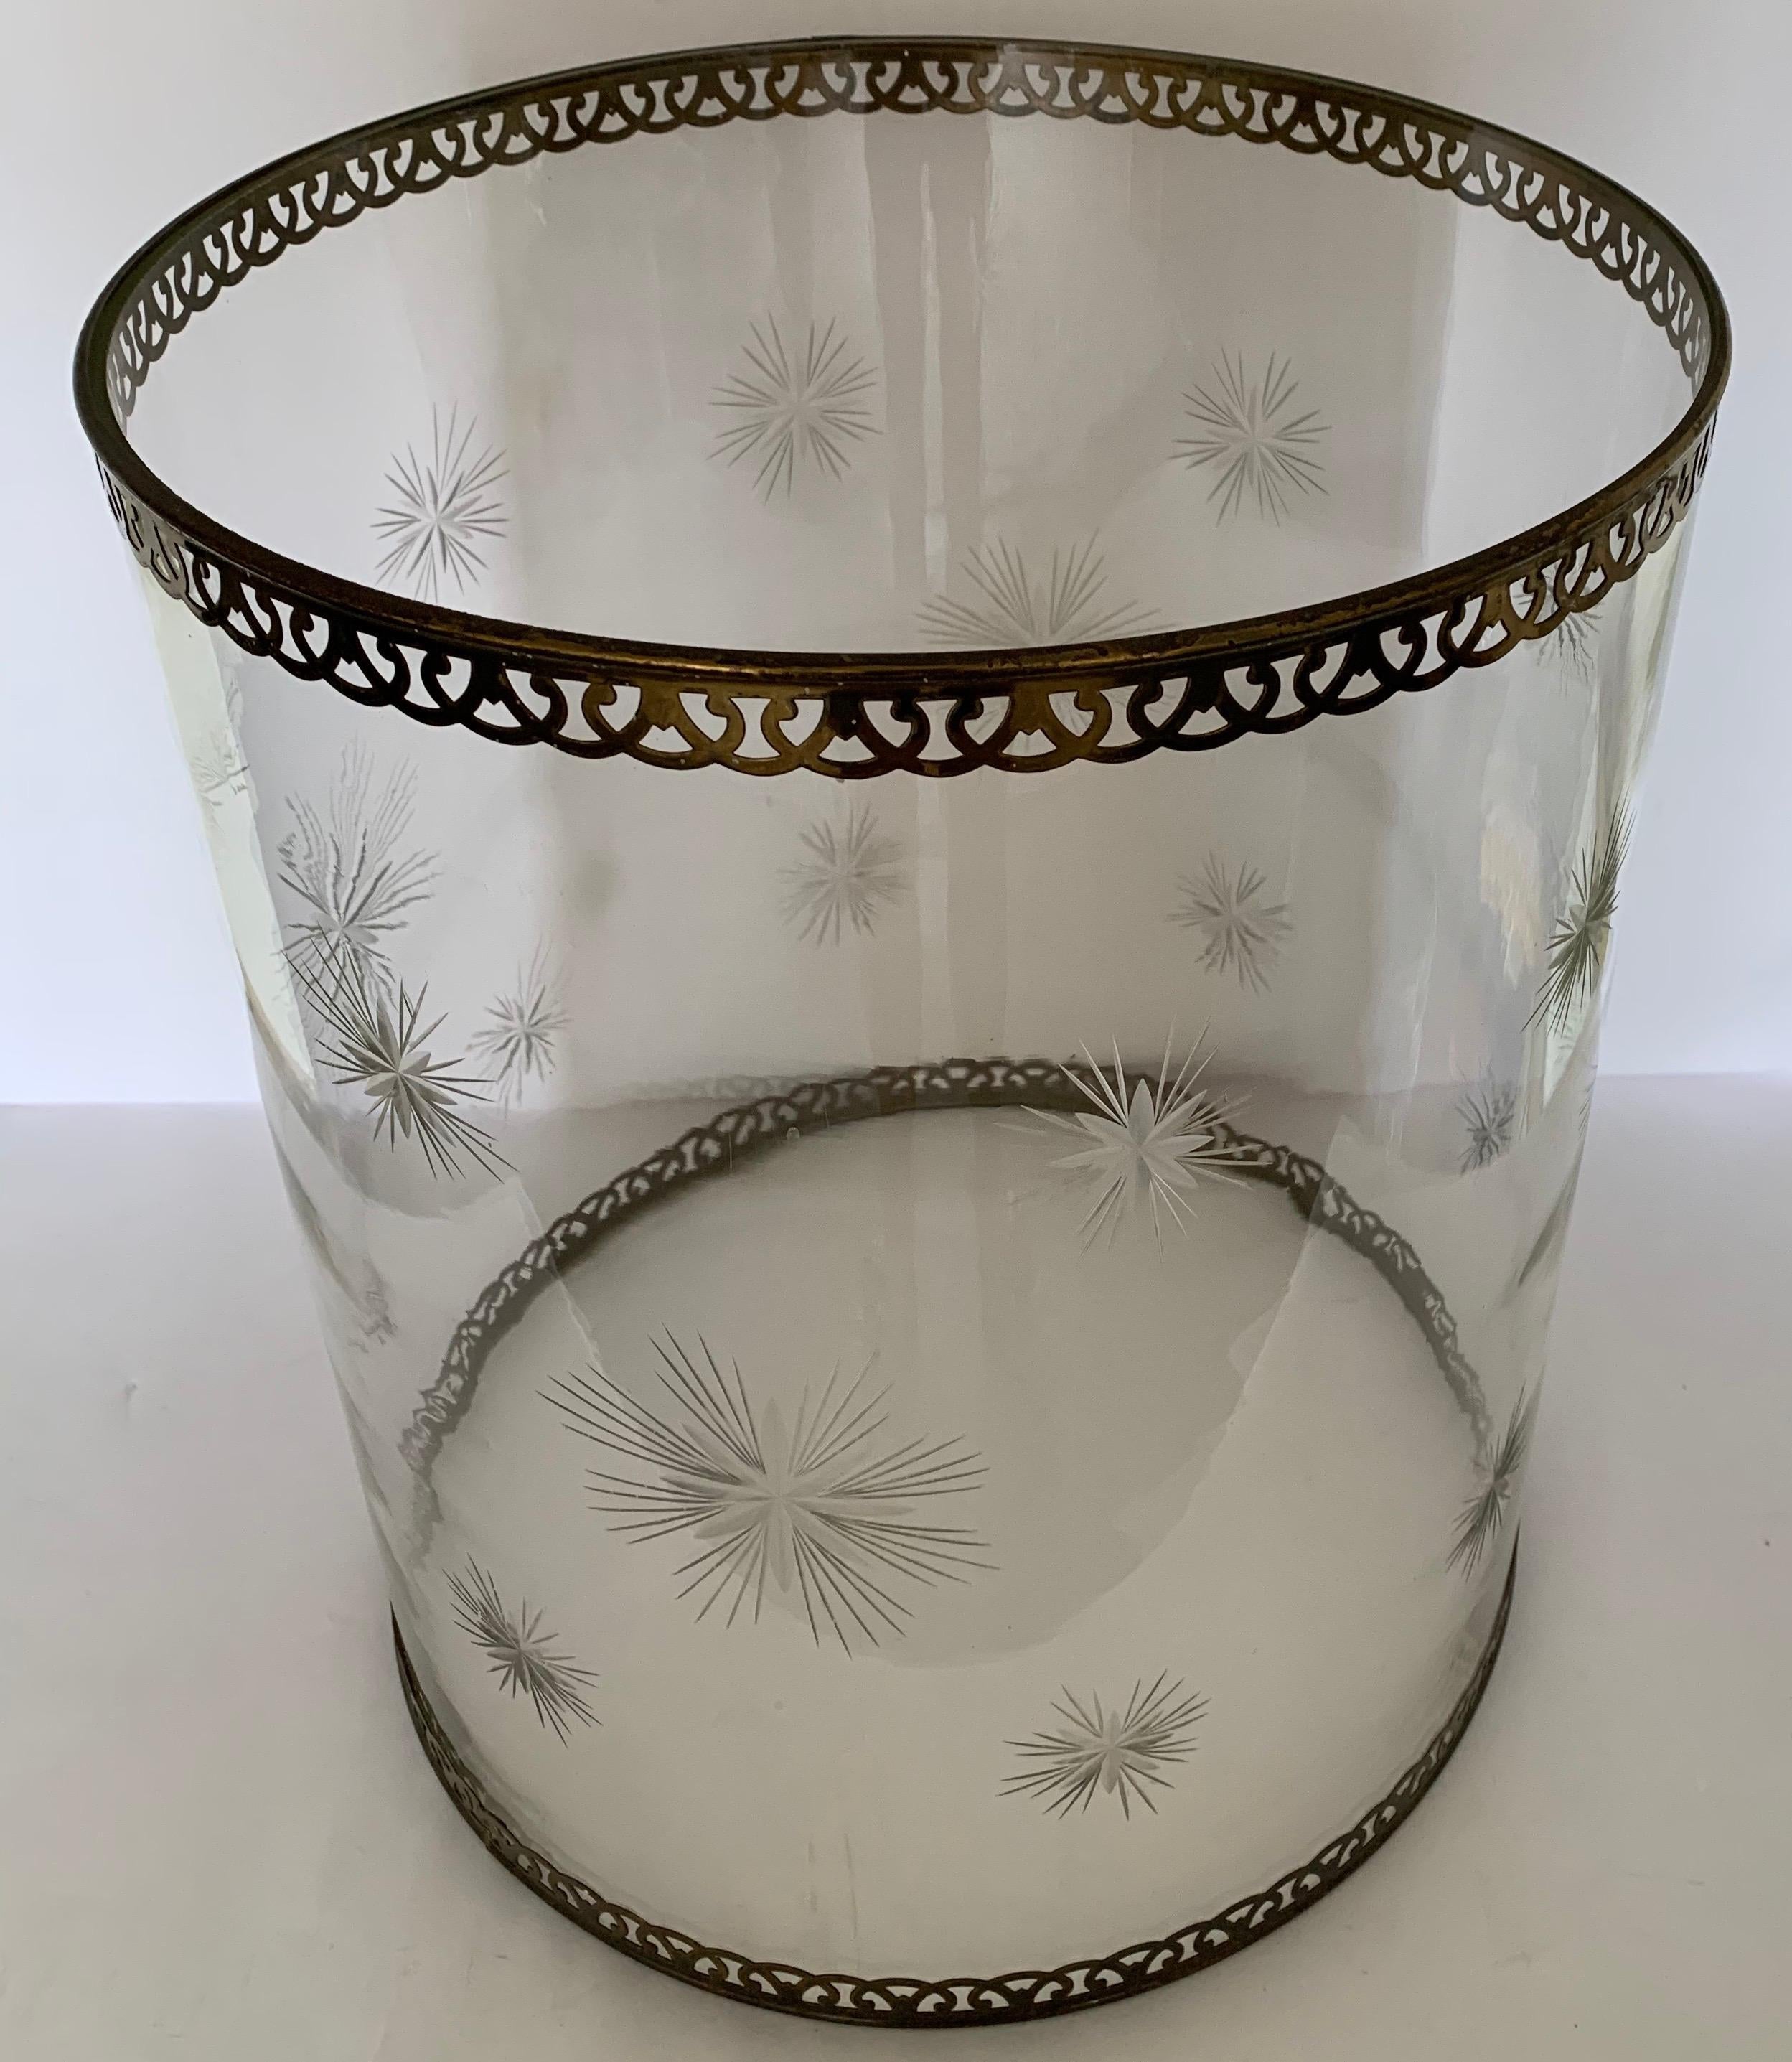 Large etched glass star motif hurricane. Clear glass with etched star motif. Removable pierced brass trim. No makers mark.